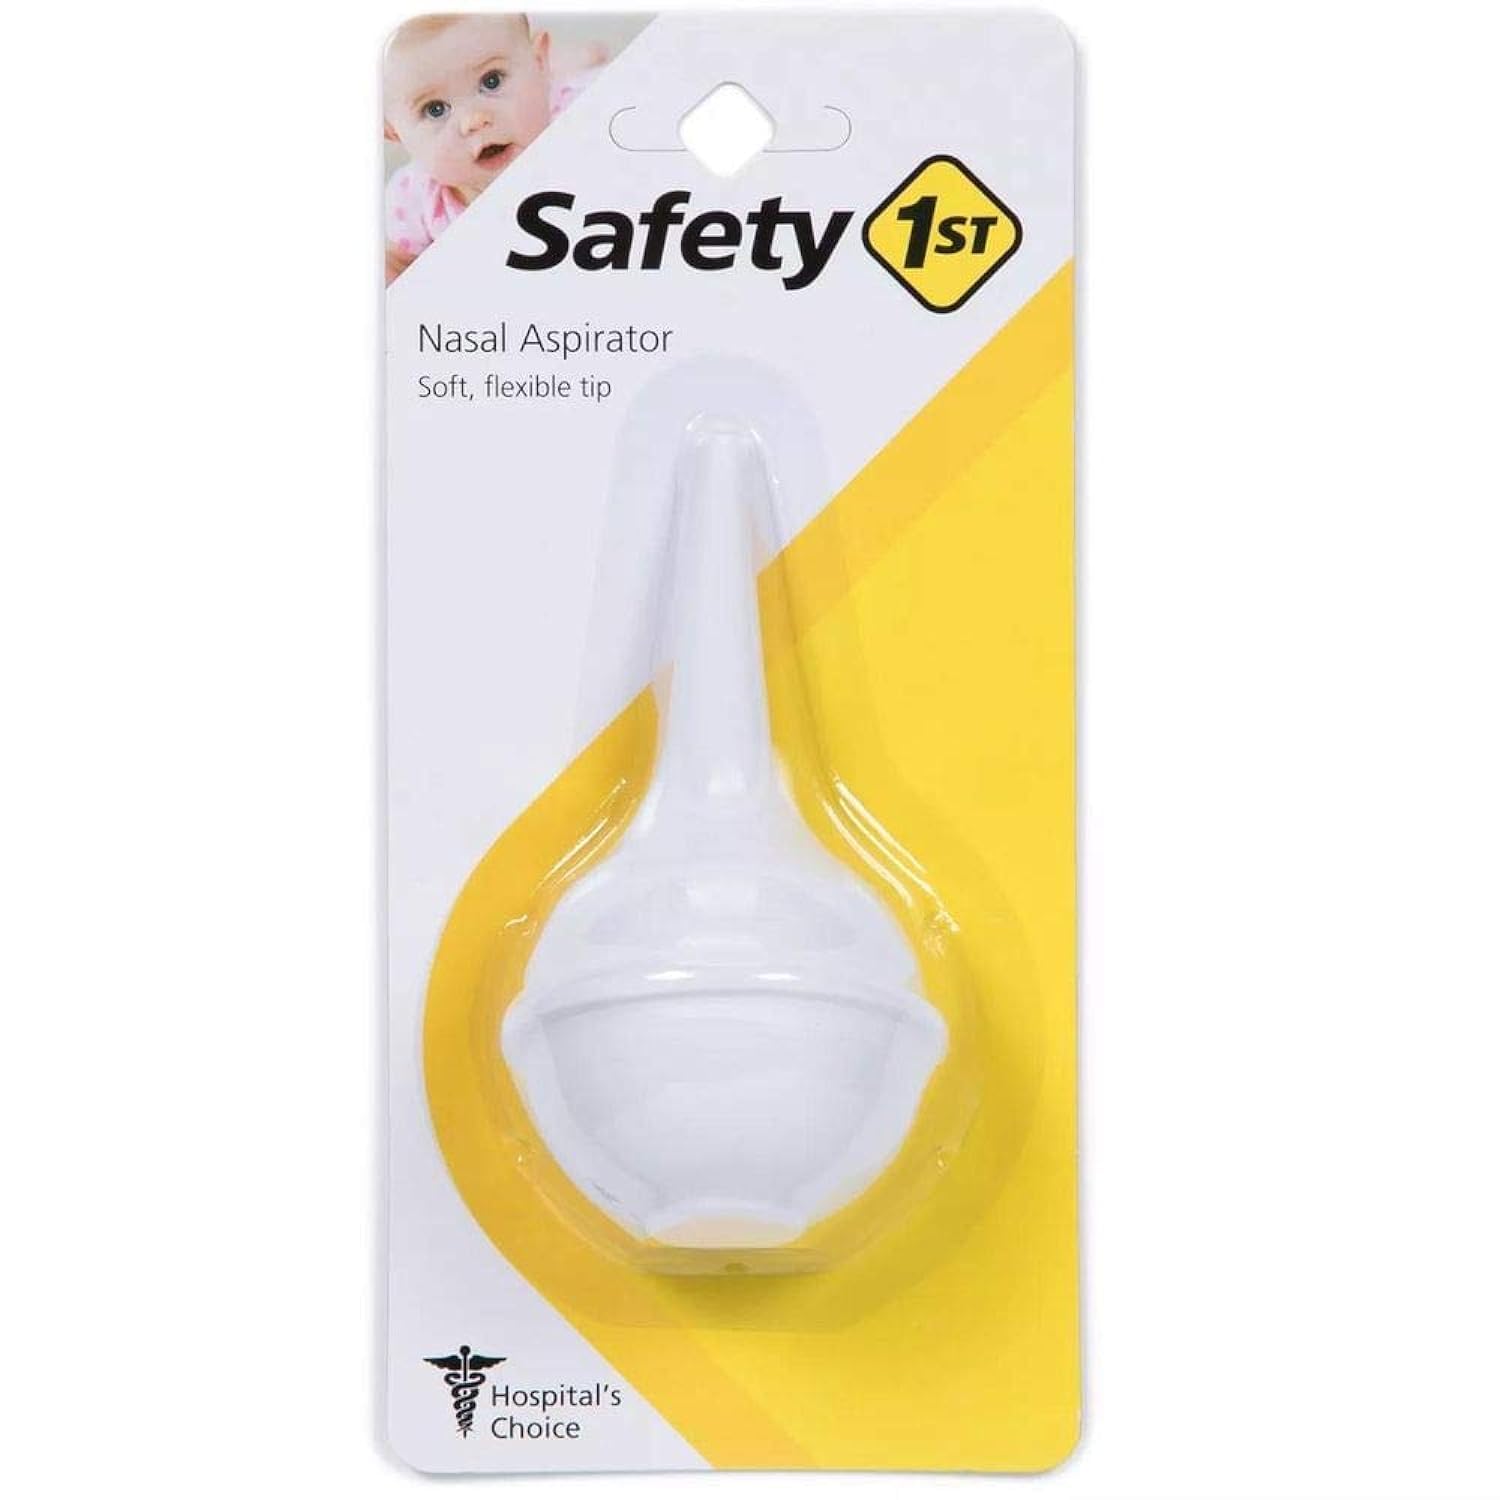 Safety 1st 3-in-1 Nursery Thermometer, Analog & Nasal Aspirator, White, One Size